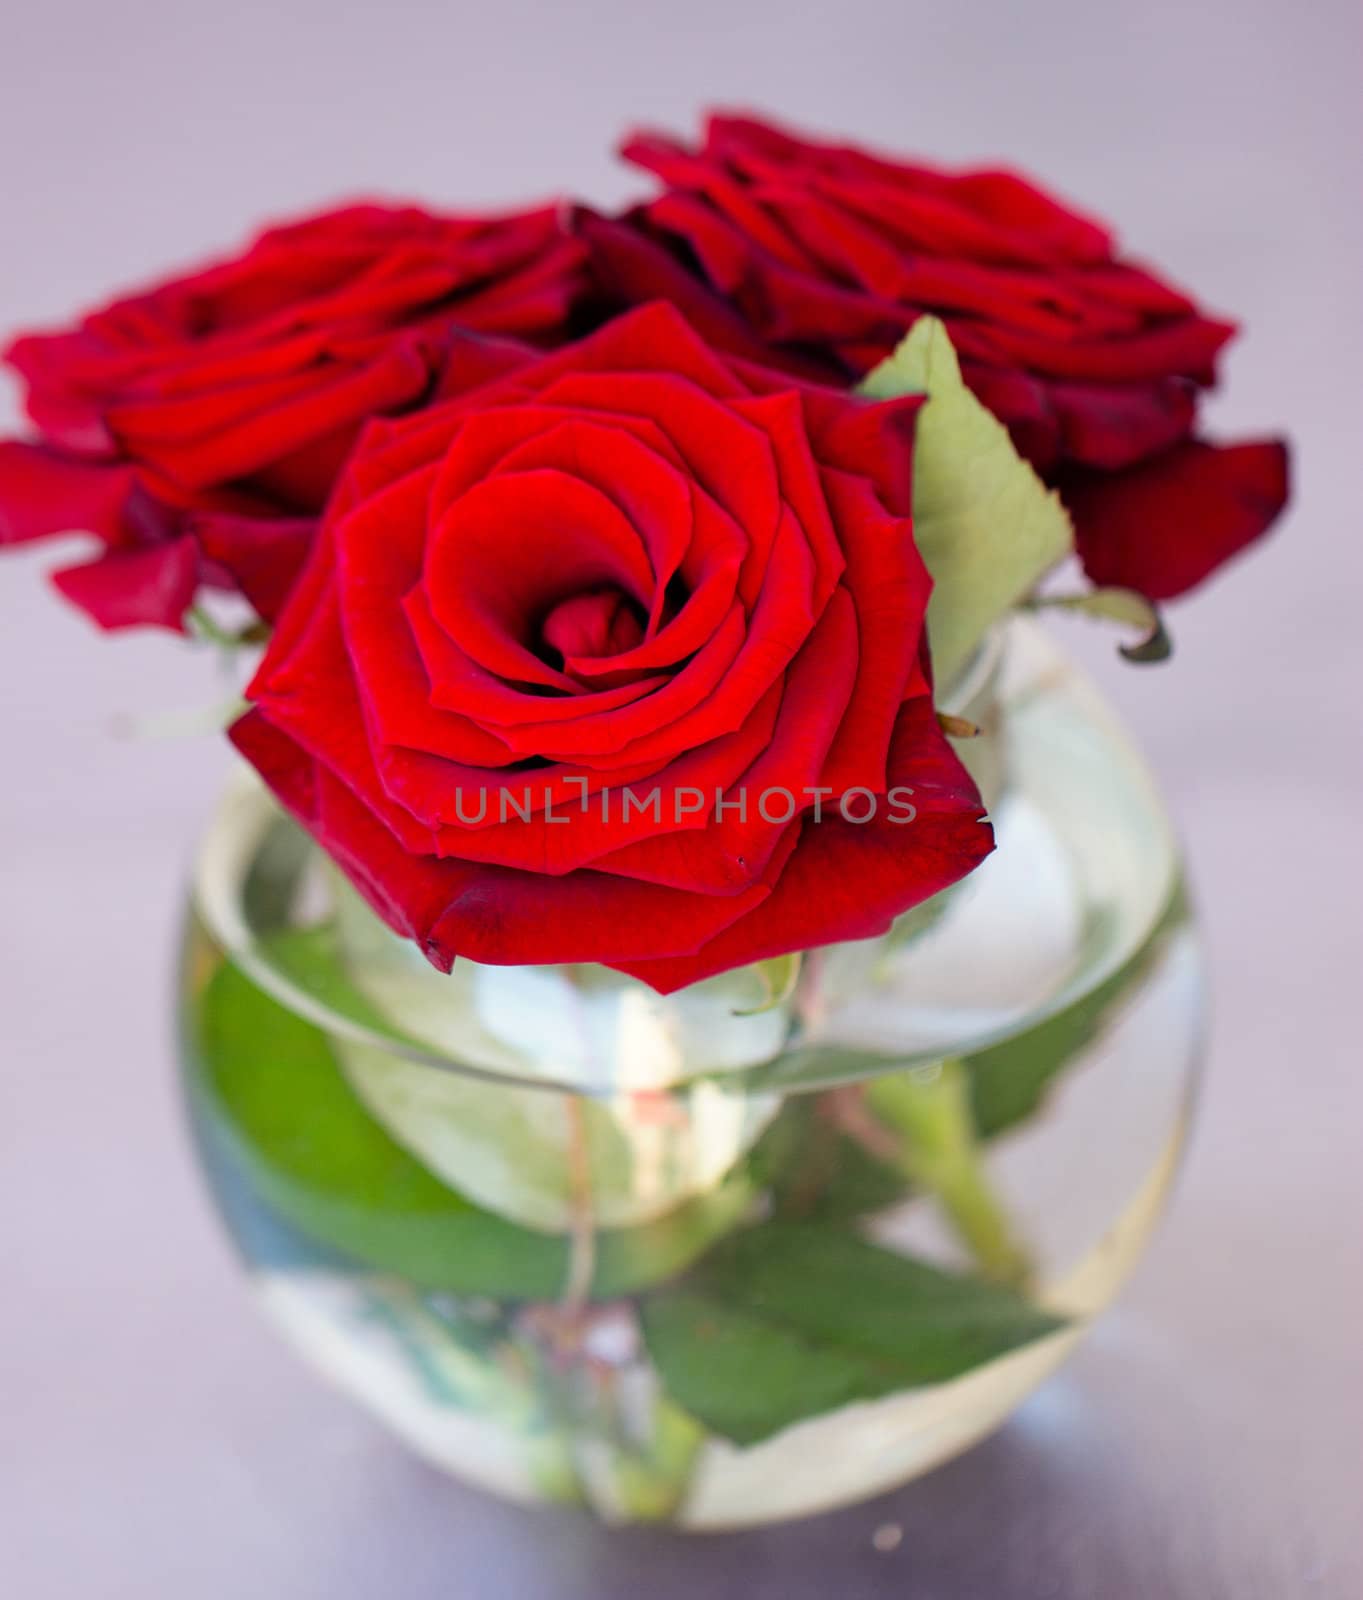 vase with red roses on the table by victosha